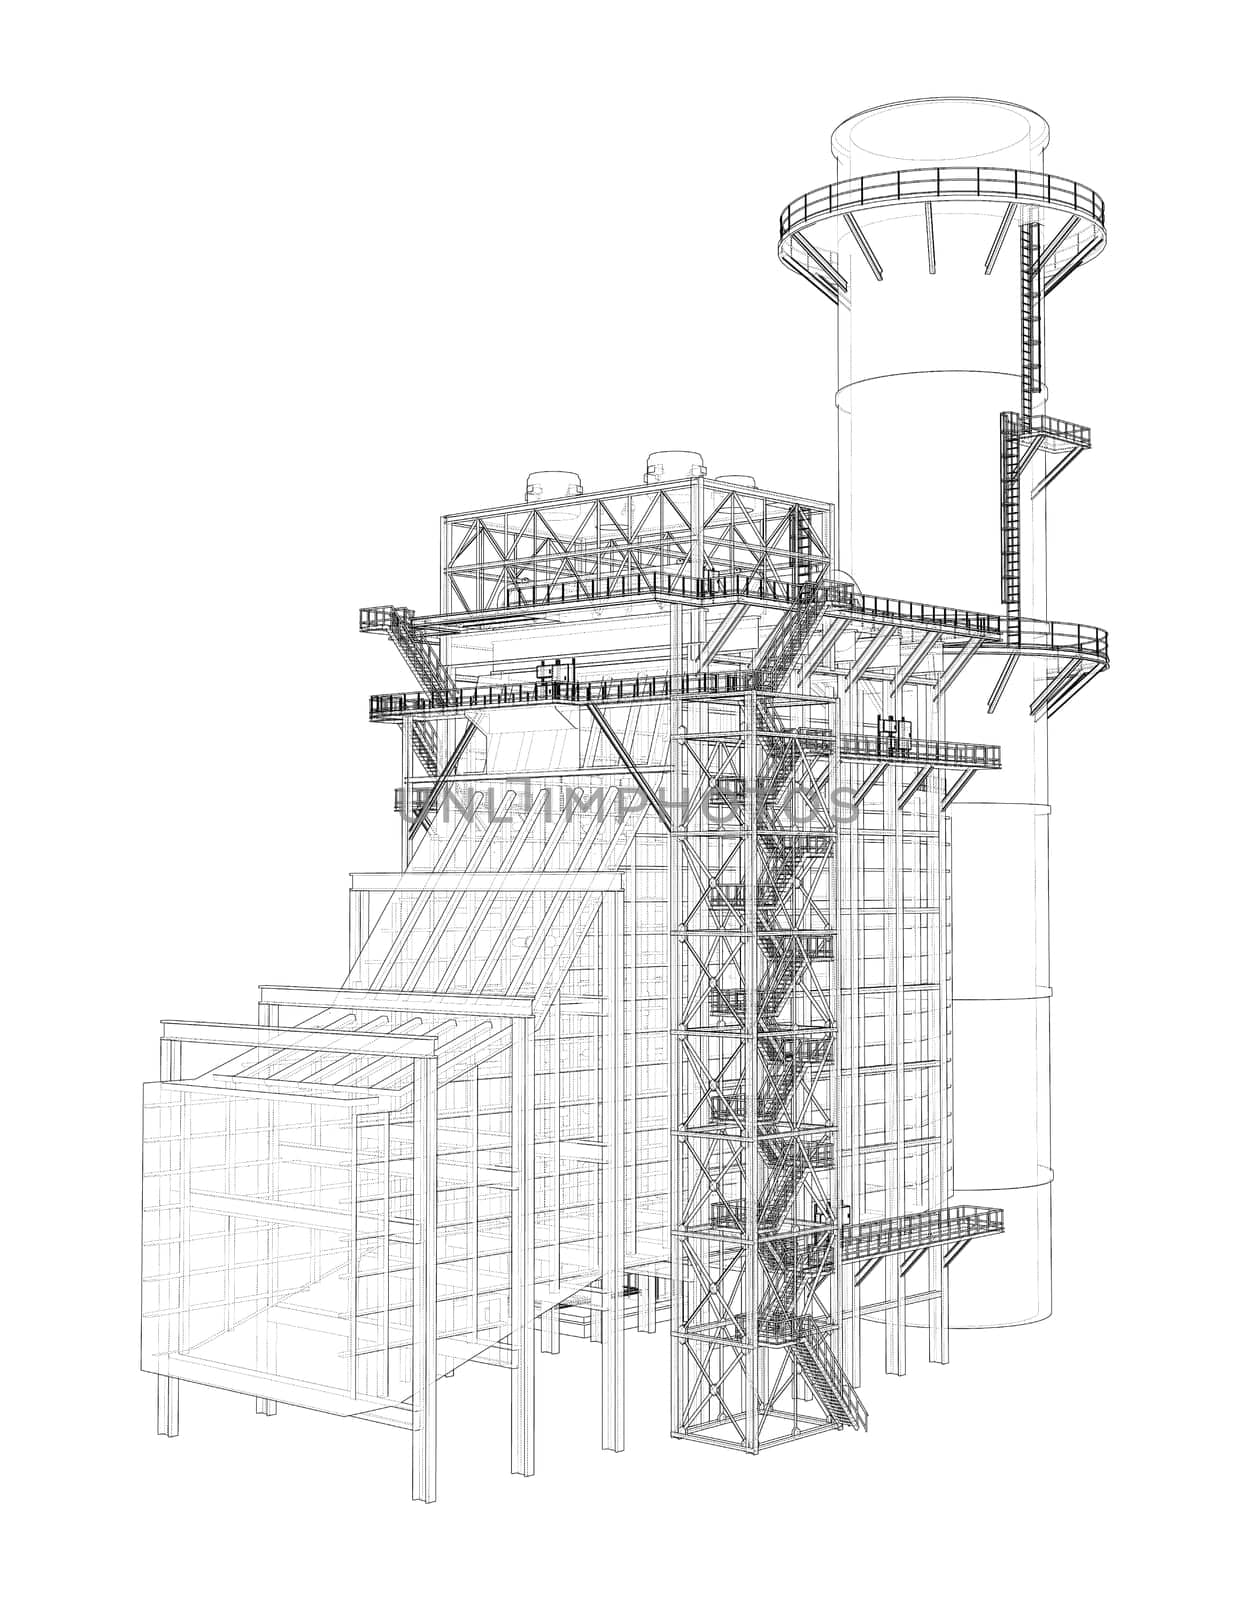 Industrial equipment. Large Industrial Furnace. 3d illustration. Wire-frame style